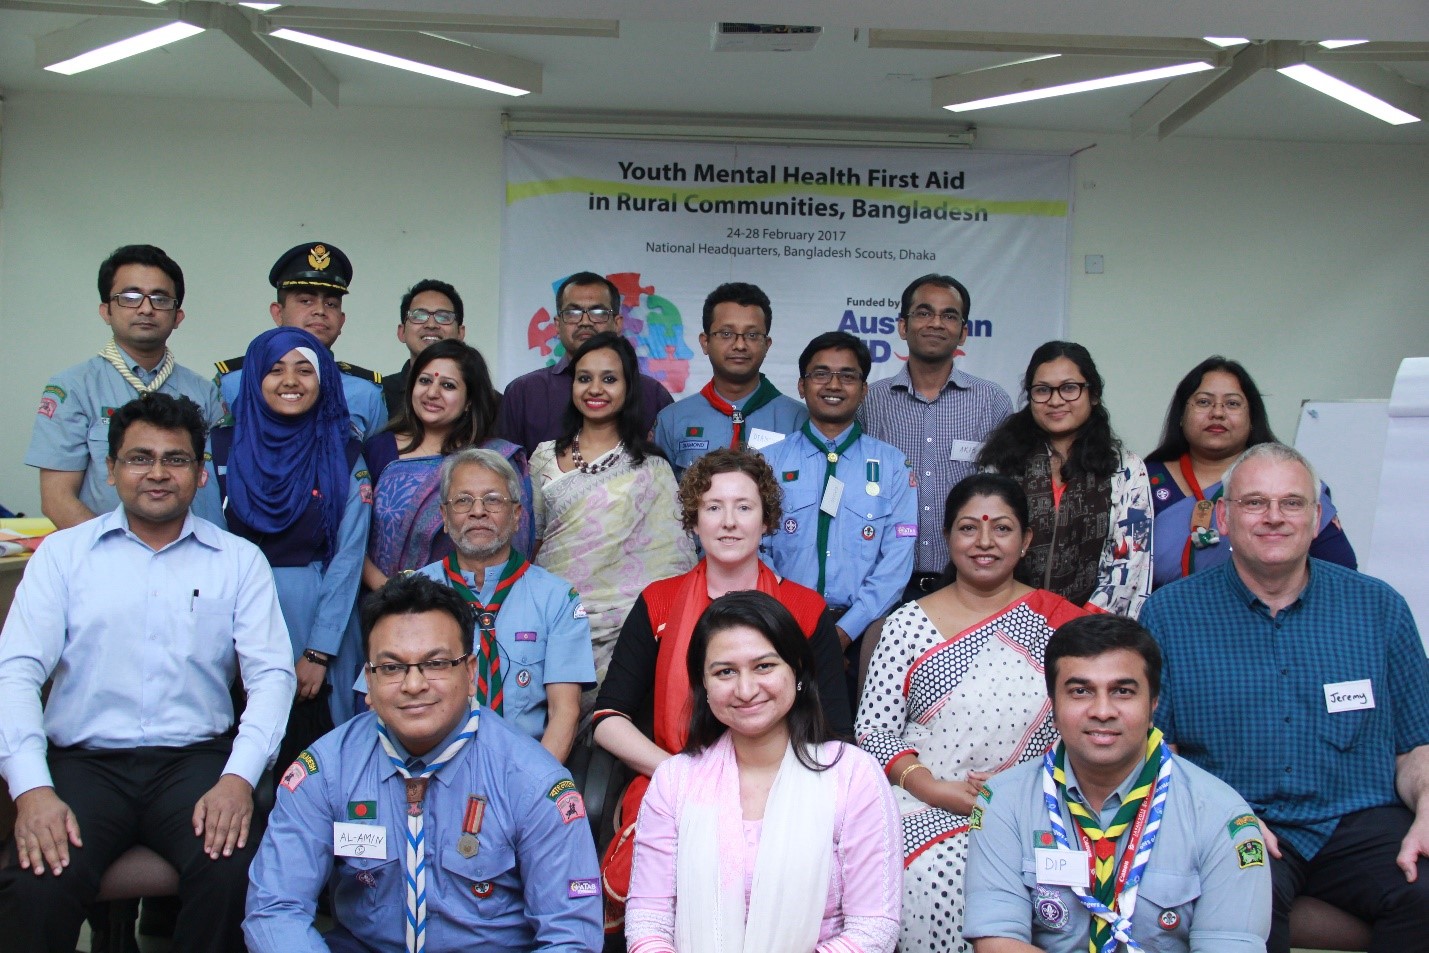 Youth Mental Health First Aid in Rural Communities, Bangladesh